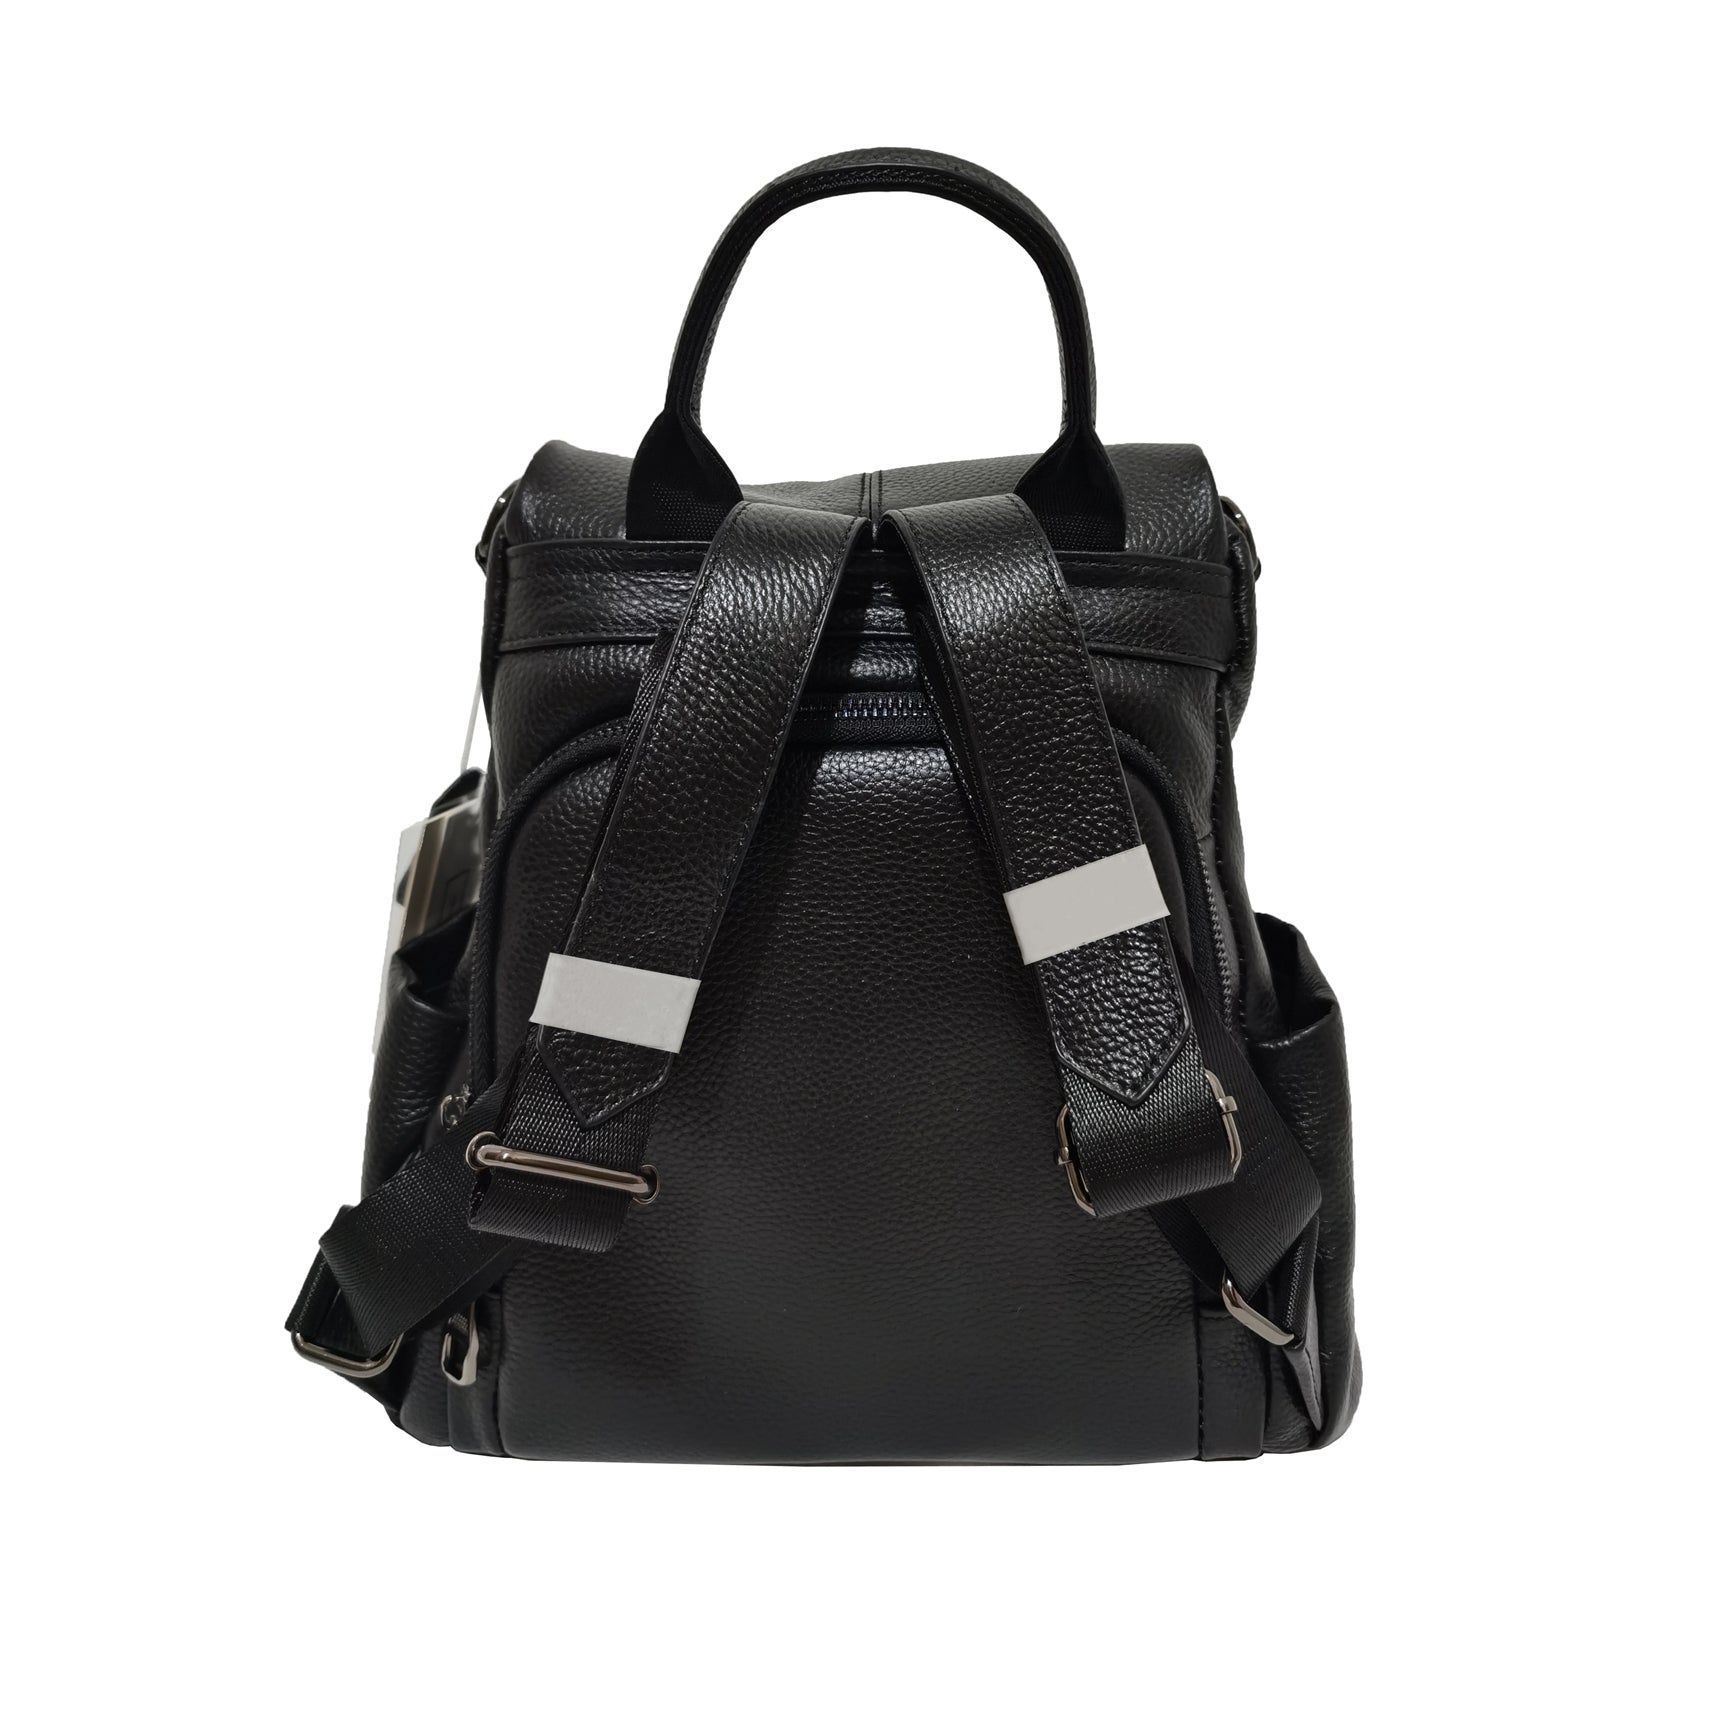 Women's and Men's unisex cowhide leather Flap design anti theft backpack by Tomorrow Closet